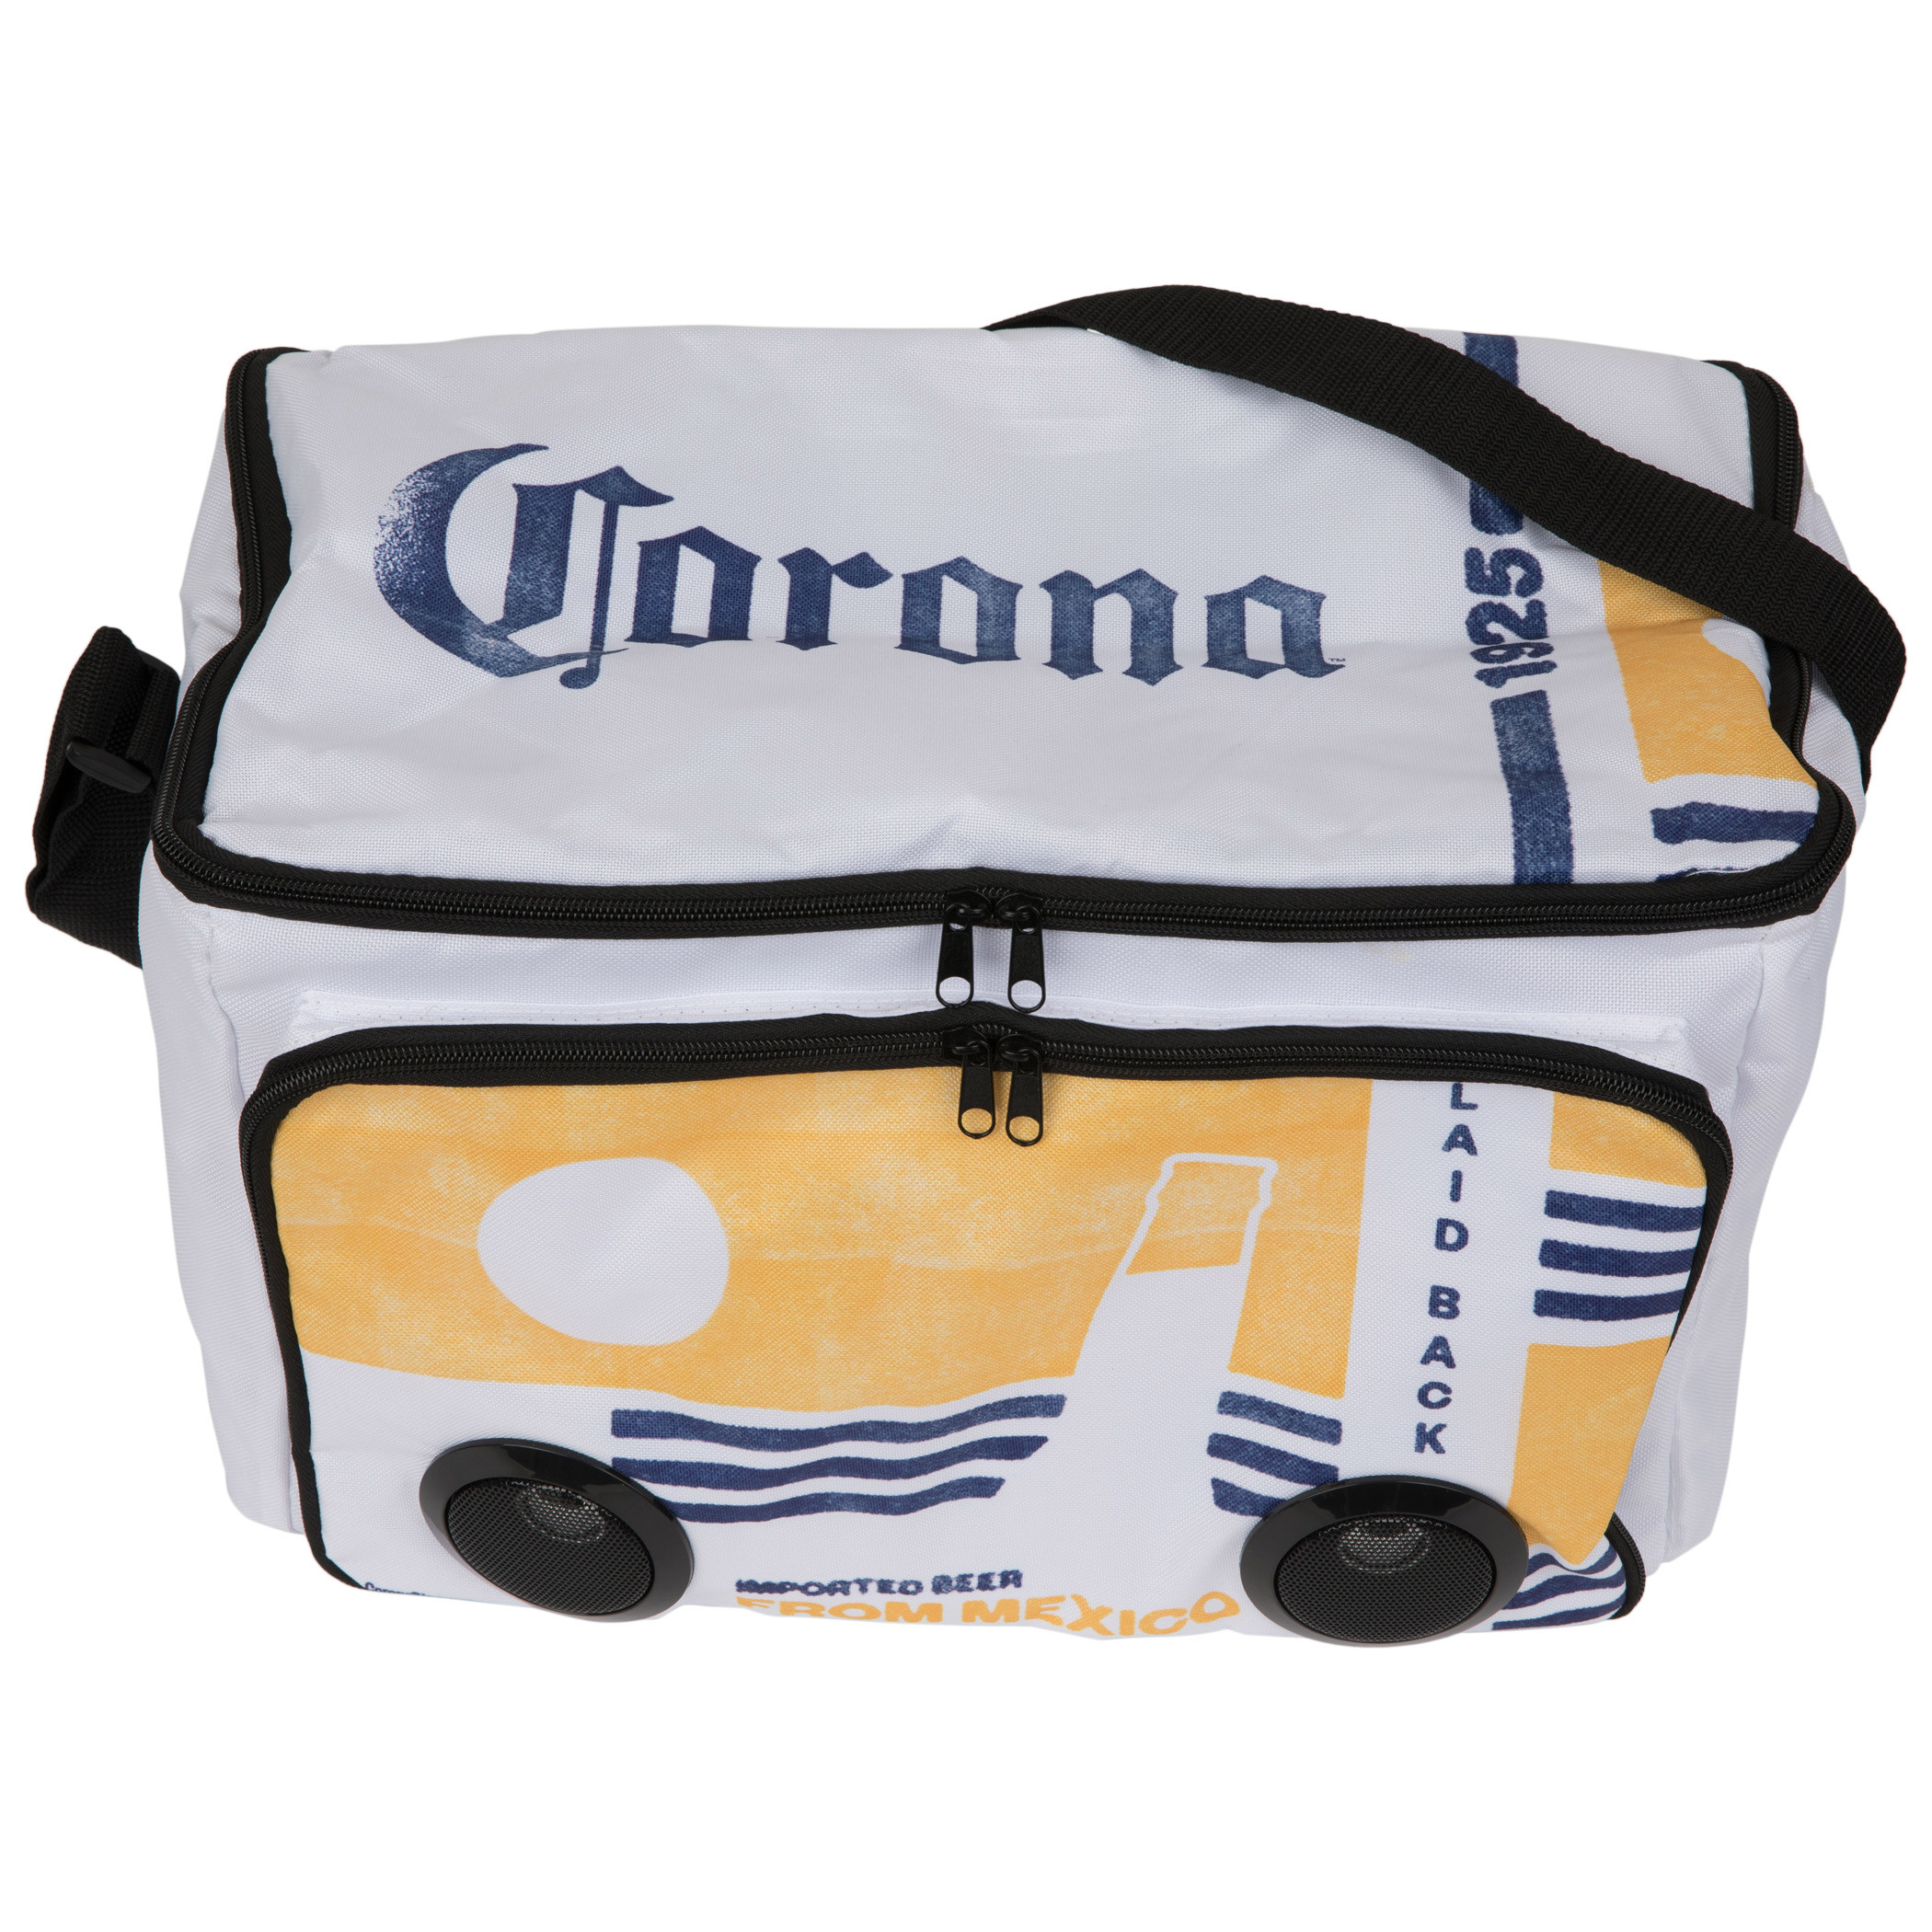 Corona Extra Beach Bottles Soft Cooler Bag with Bluetooth Speakers